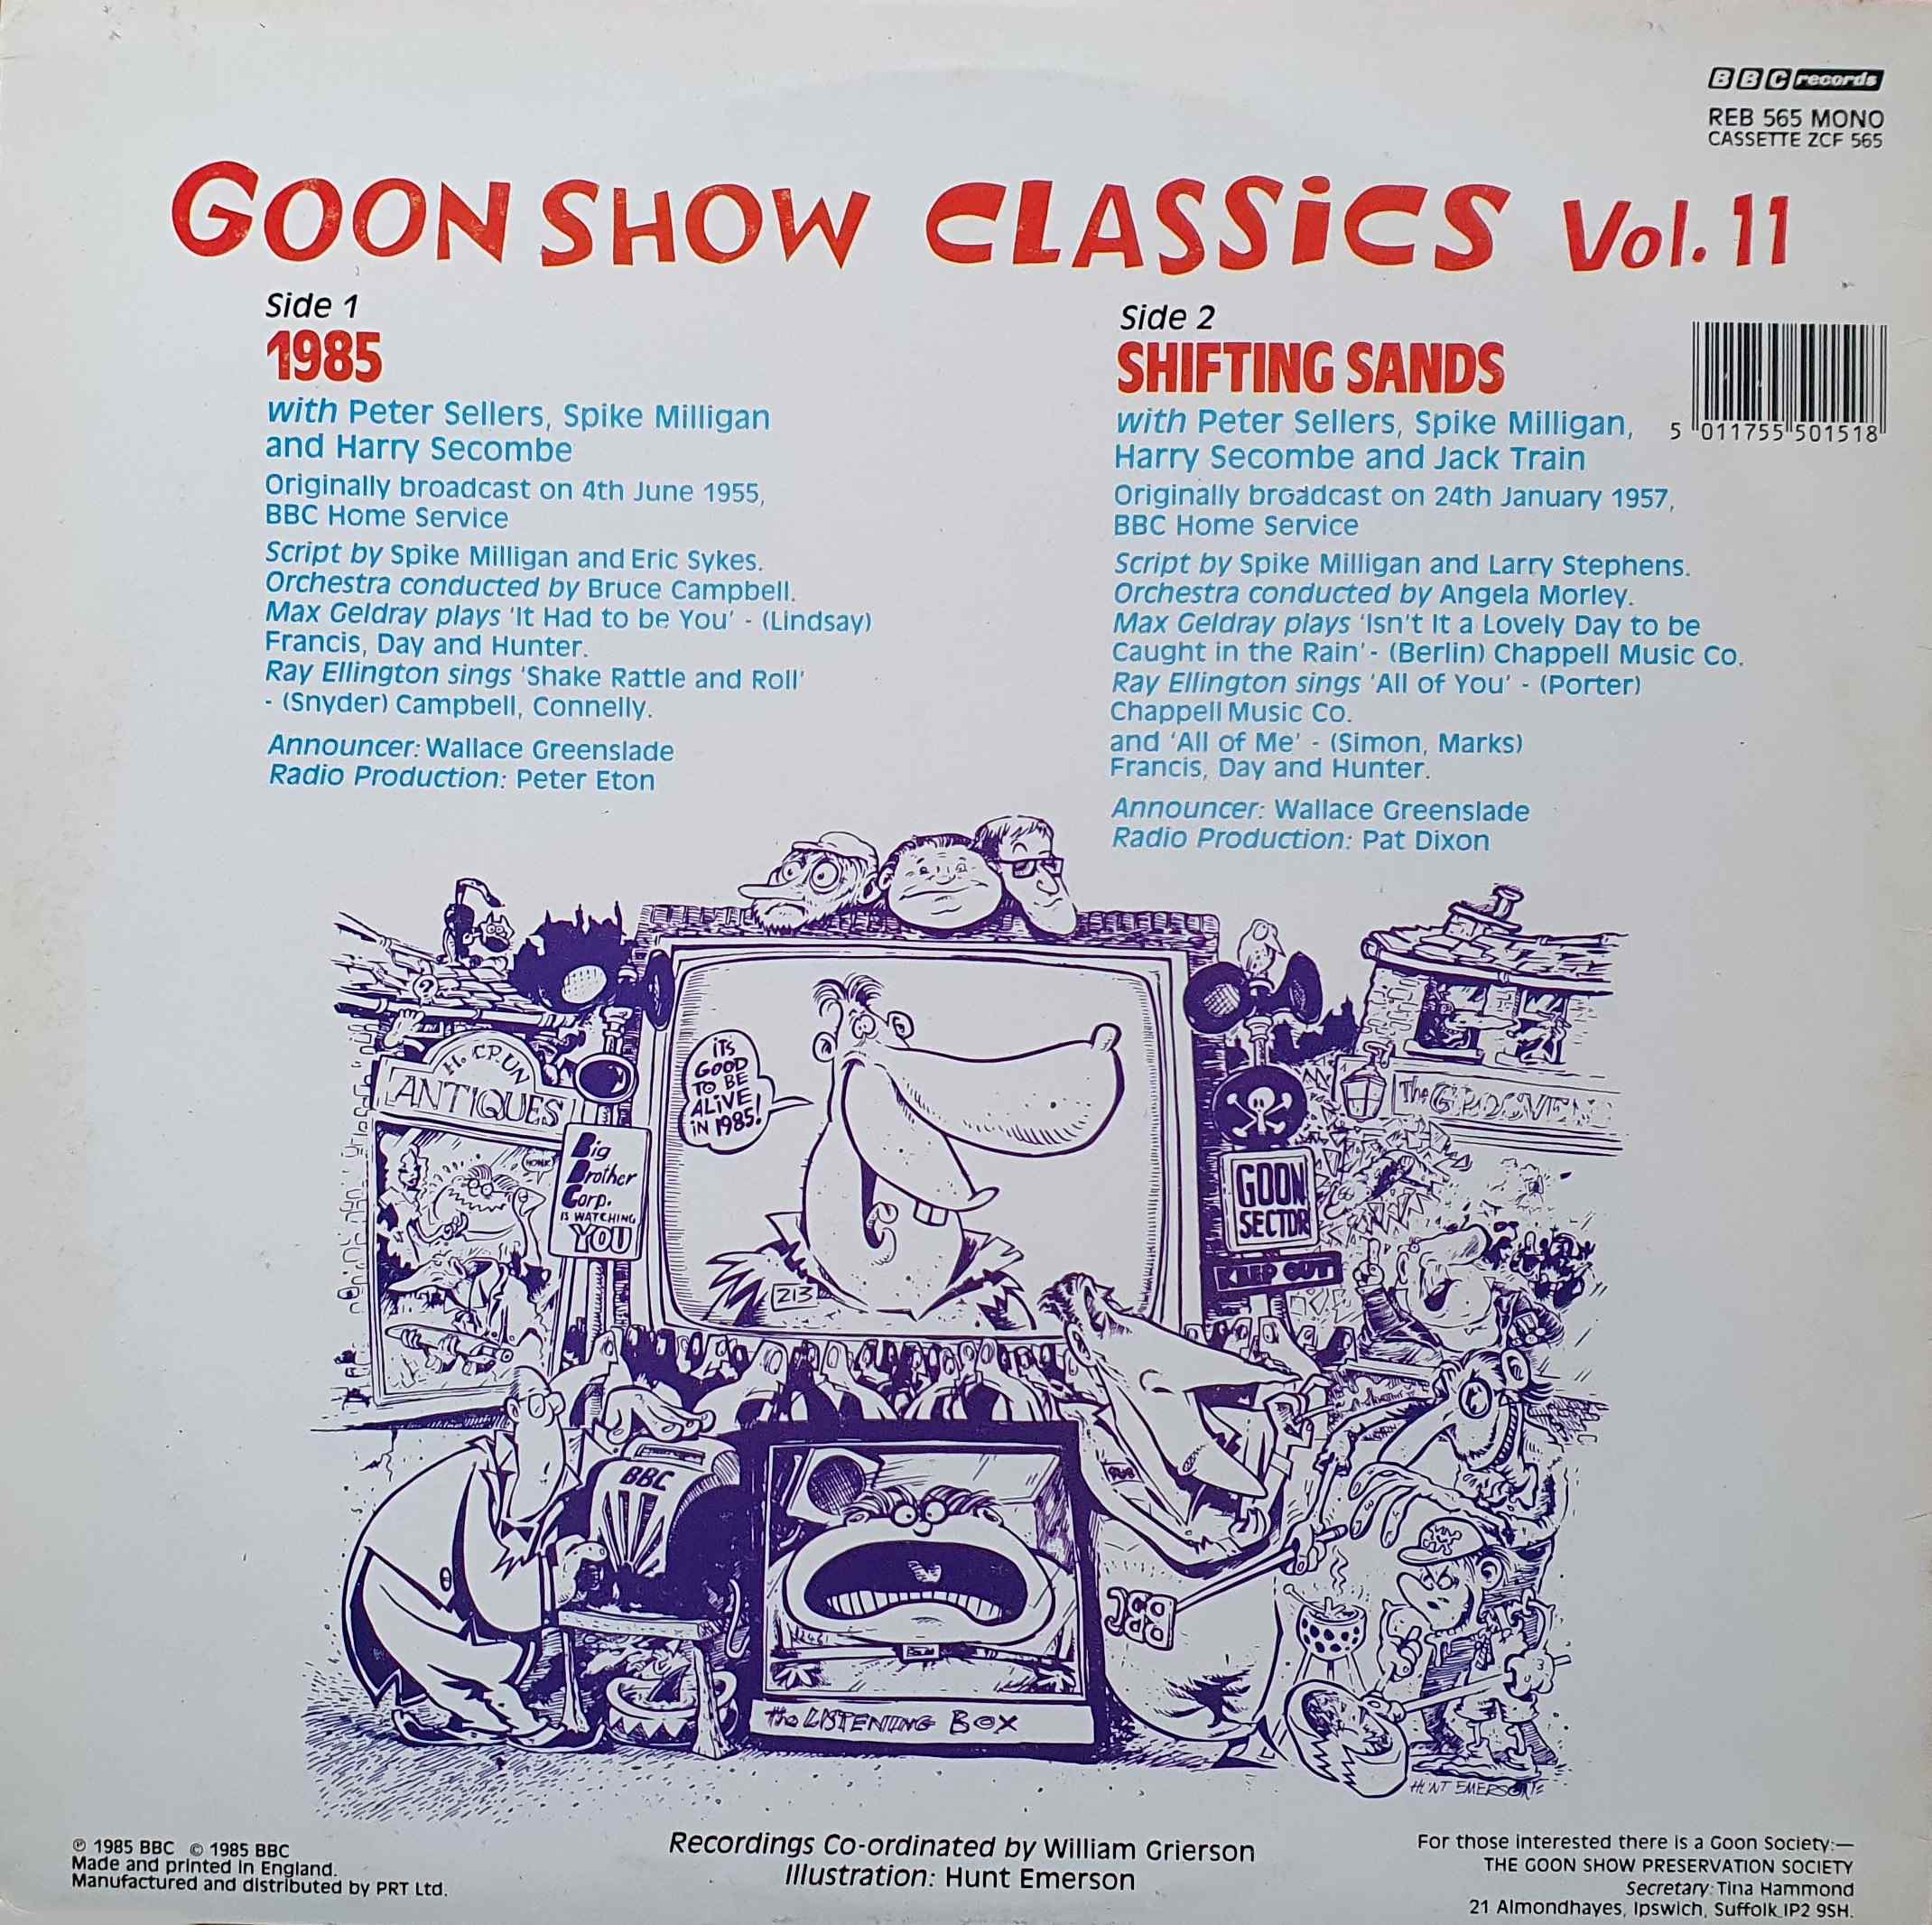 Picture of REB 565 Goon show classics - Volume 11 by artist Spike Milligan / Eric Sykes / Larry Stephens from the BBC records and Tapes library